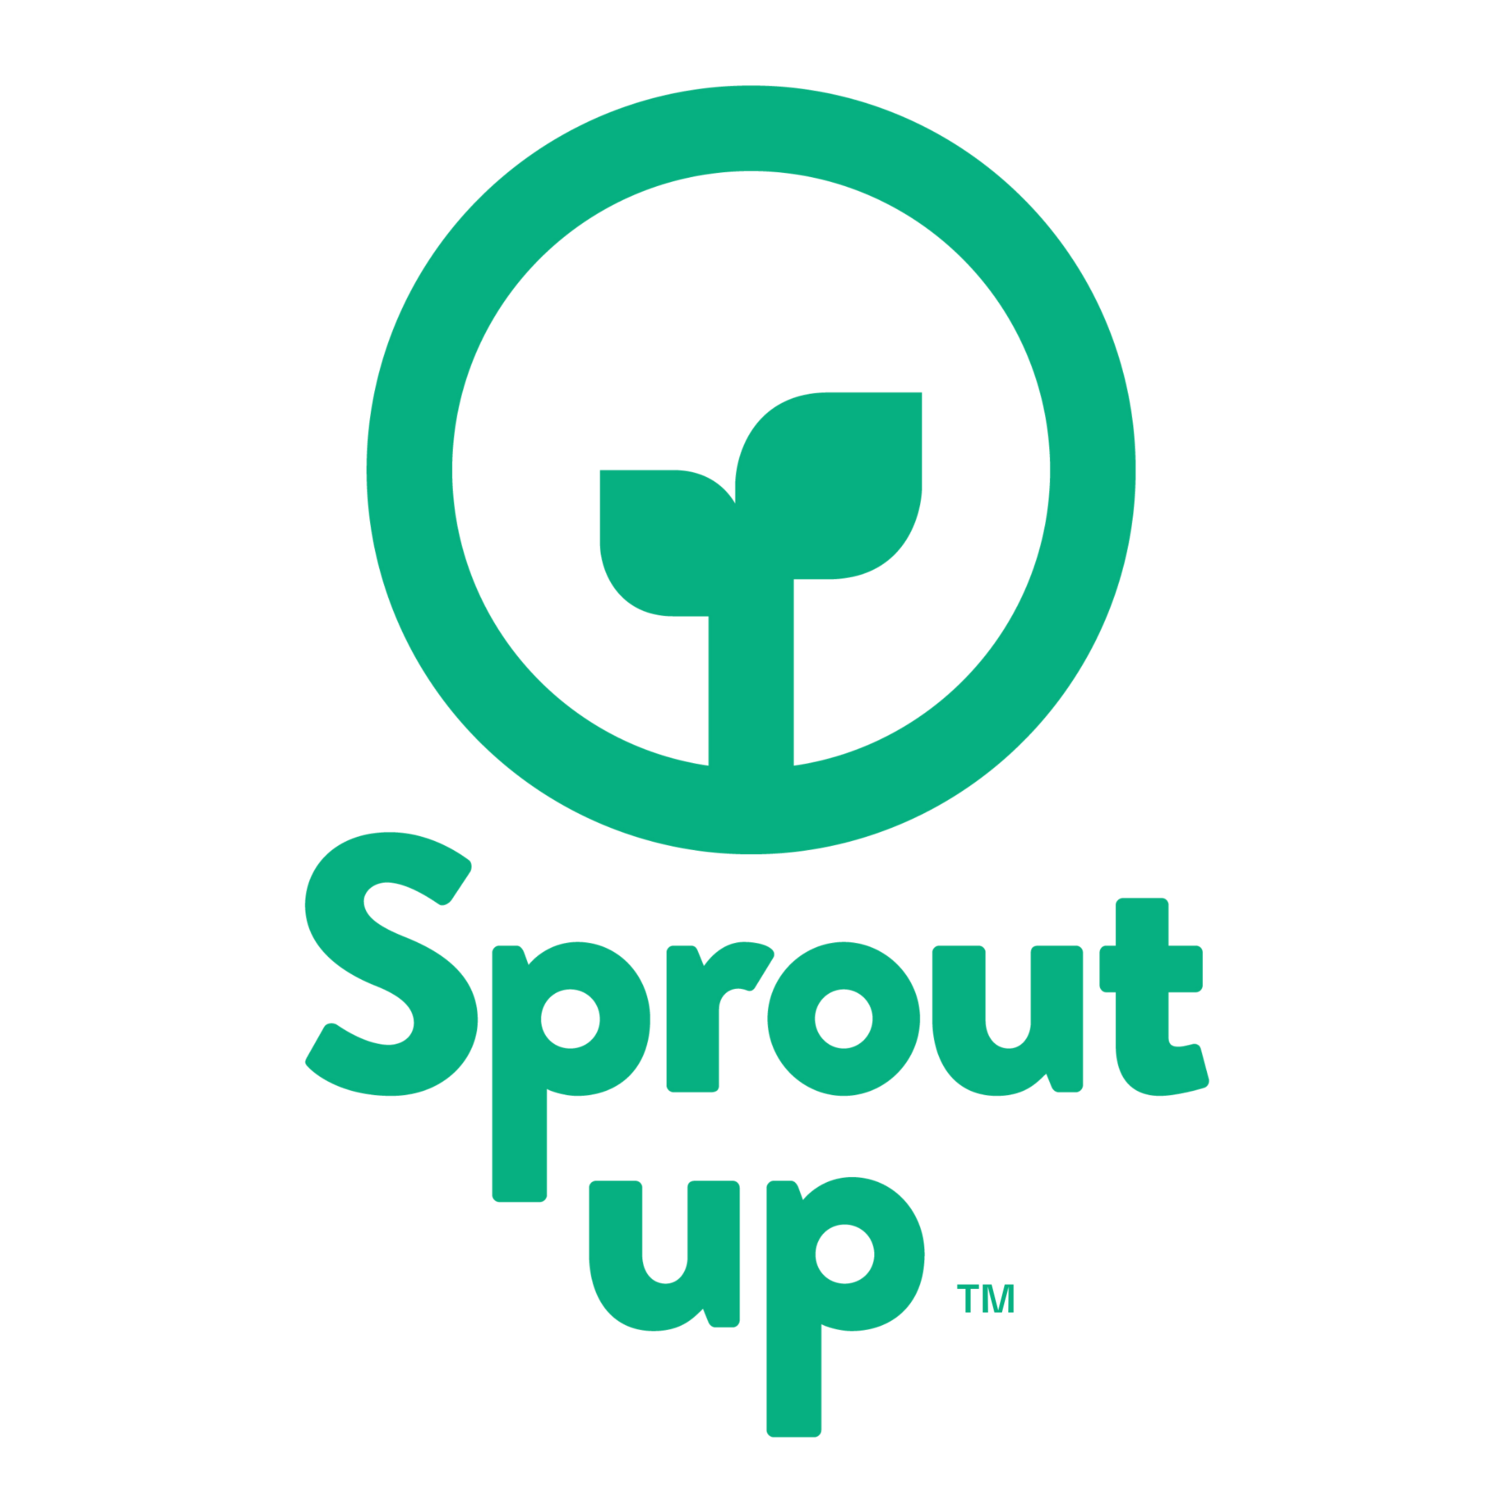 Sprout Up